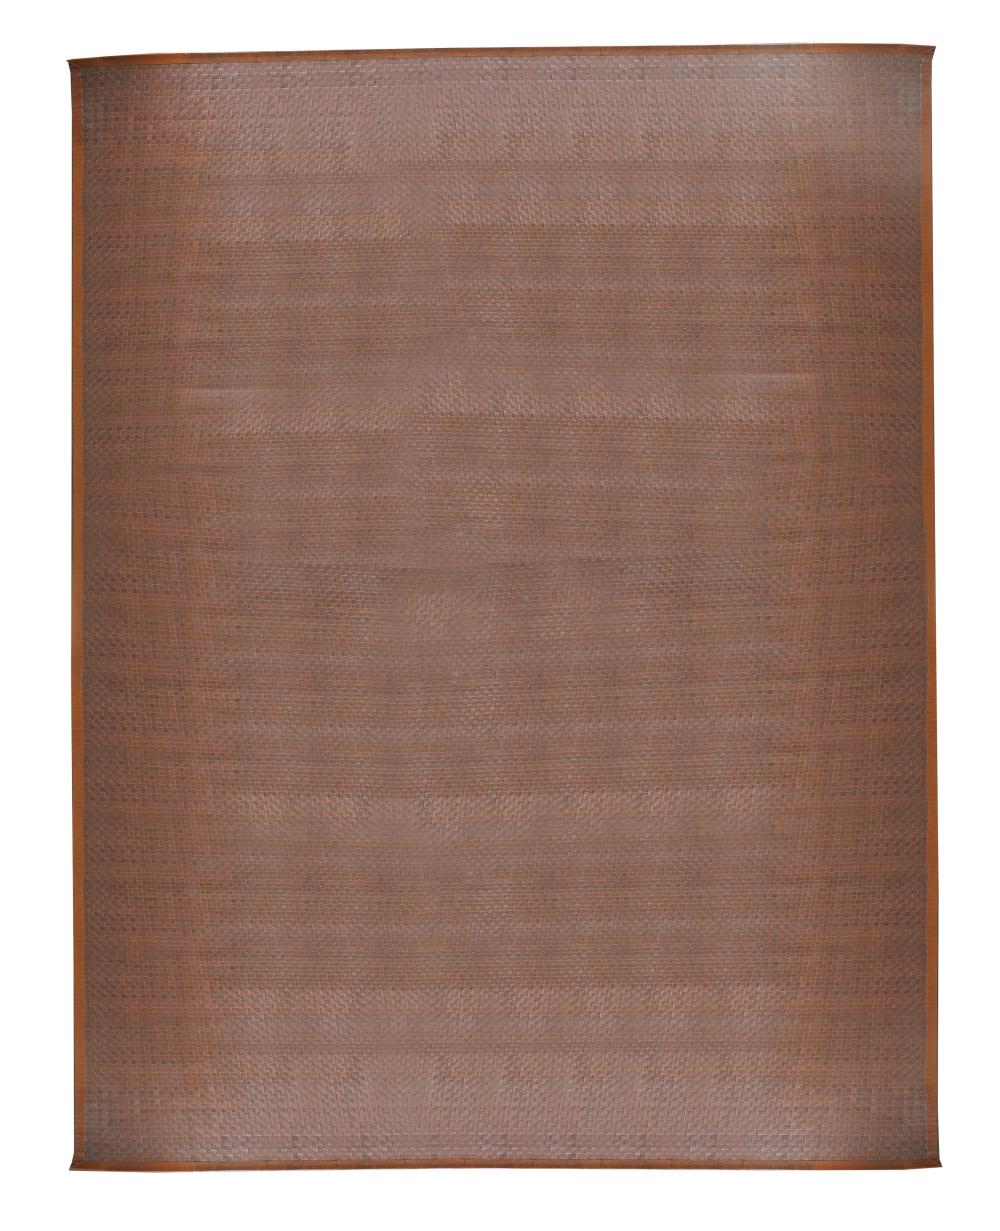 BROWN WOVEN LEATHER RUGBrown Woven